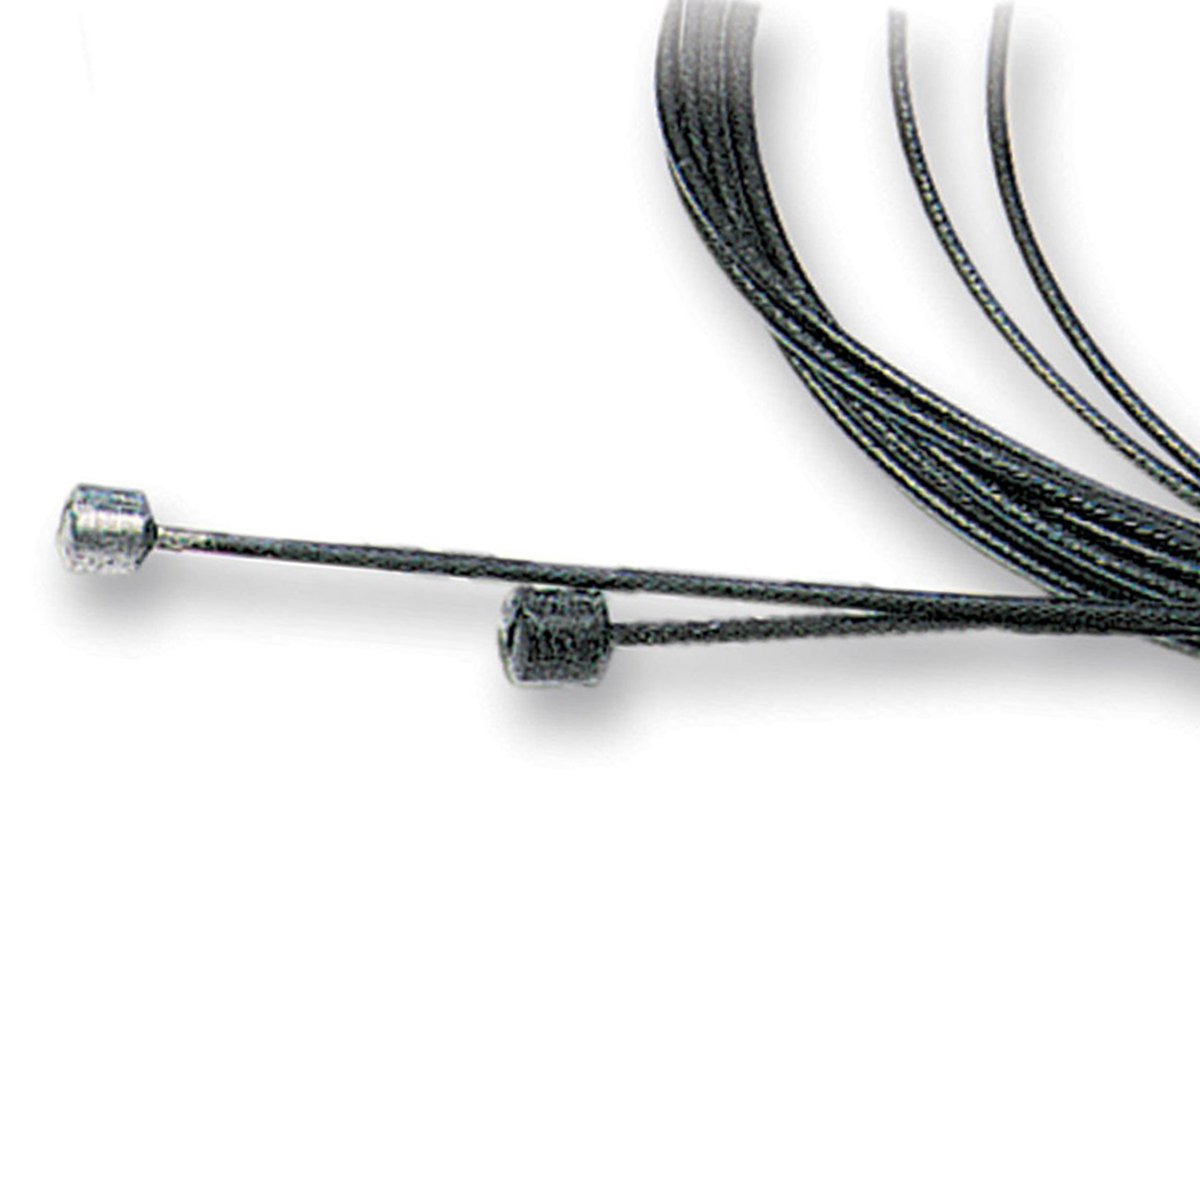 Aztec - PTFE Cable - Inner Wire - Mountain Bike Brake